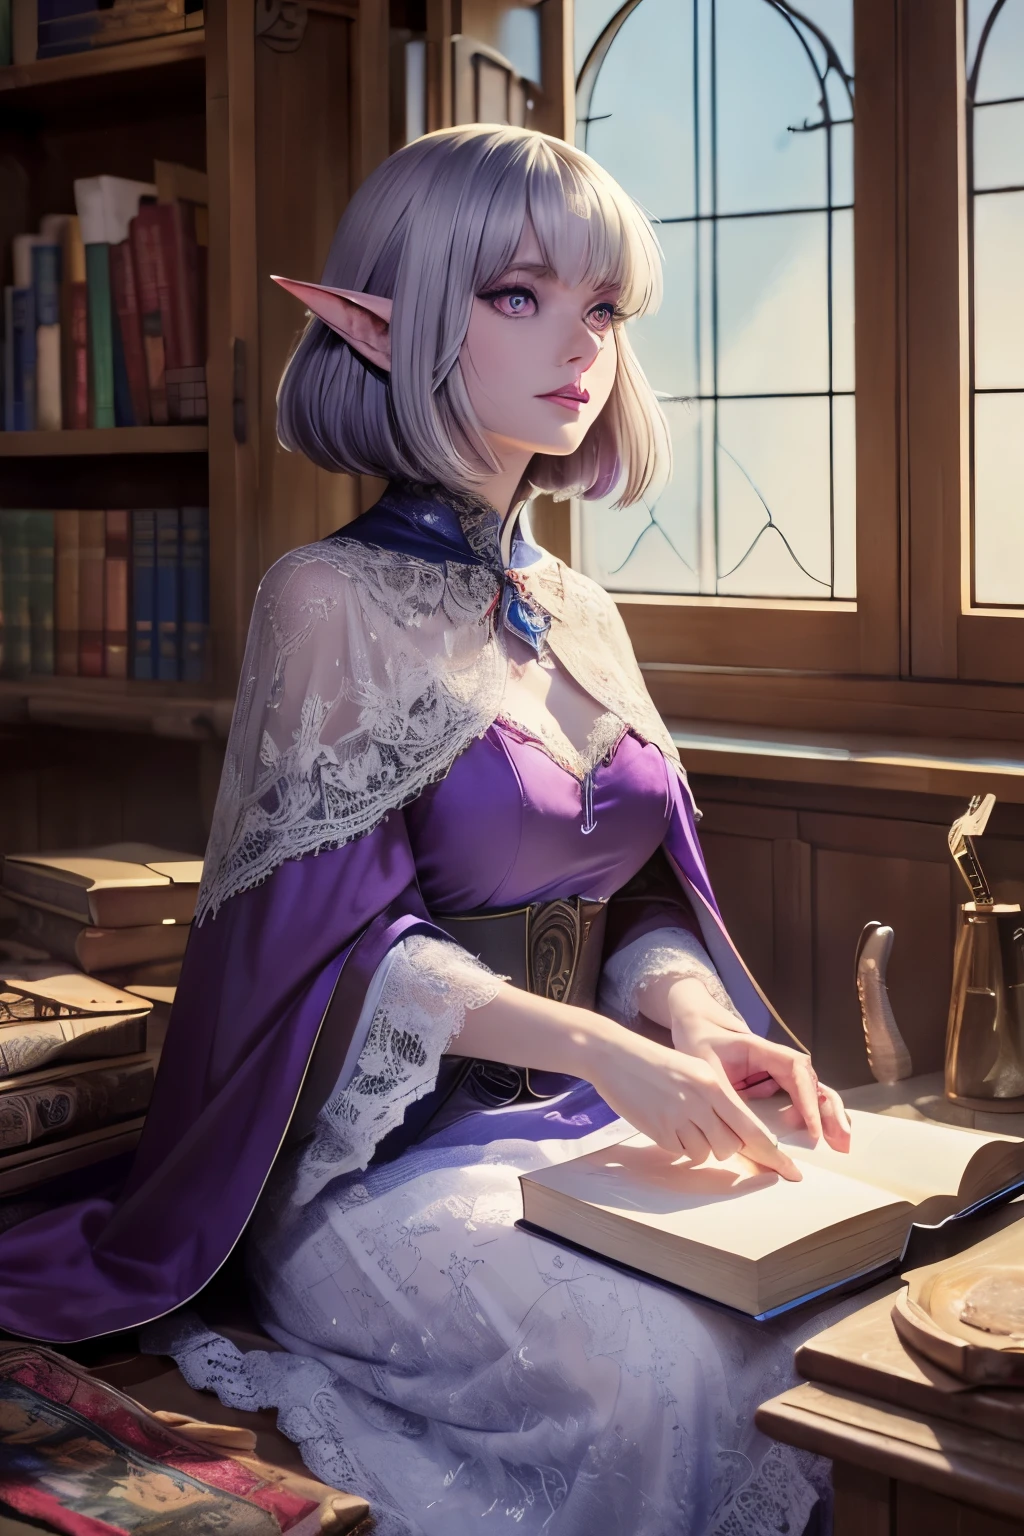 (ultra-detailed face, looking away:1.3), (Fantasy Illustration with Gothic & Ukiyo-e & Comic Art), (1 woman, 2 cat:1.5), (She has her back turned, a magic book open on her desk in her magic lab, and is holding a cat with both hands:1.2), (A middle-aged dark elf woman with white hair, blunt bangs, bob cut, and dark purple skin, lavender eyes:1.2), BREAK (She is wearing a cape dress with sky blue lace and red sandals), BREAK (A large cat with blue eyes is lying down beside her:1.2), BREAK (In the background, we see a shelf where magic books and magic tools are tucked away)